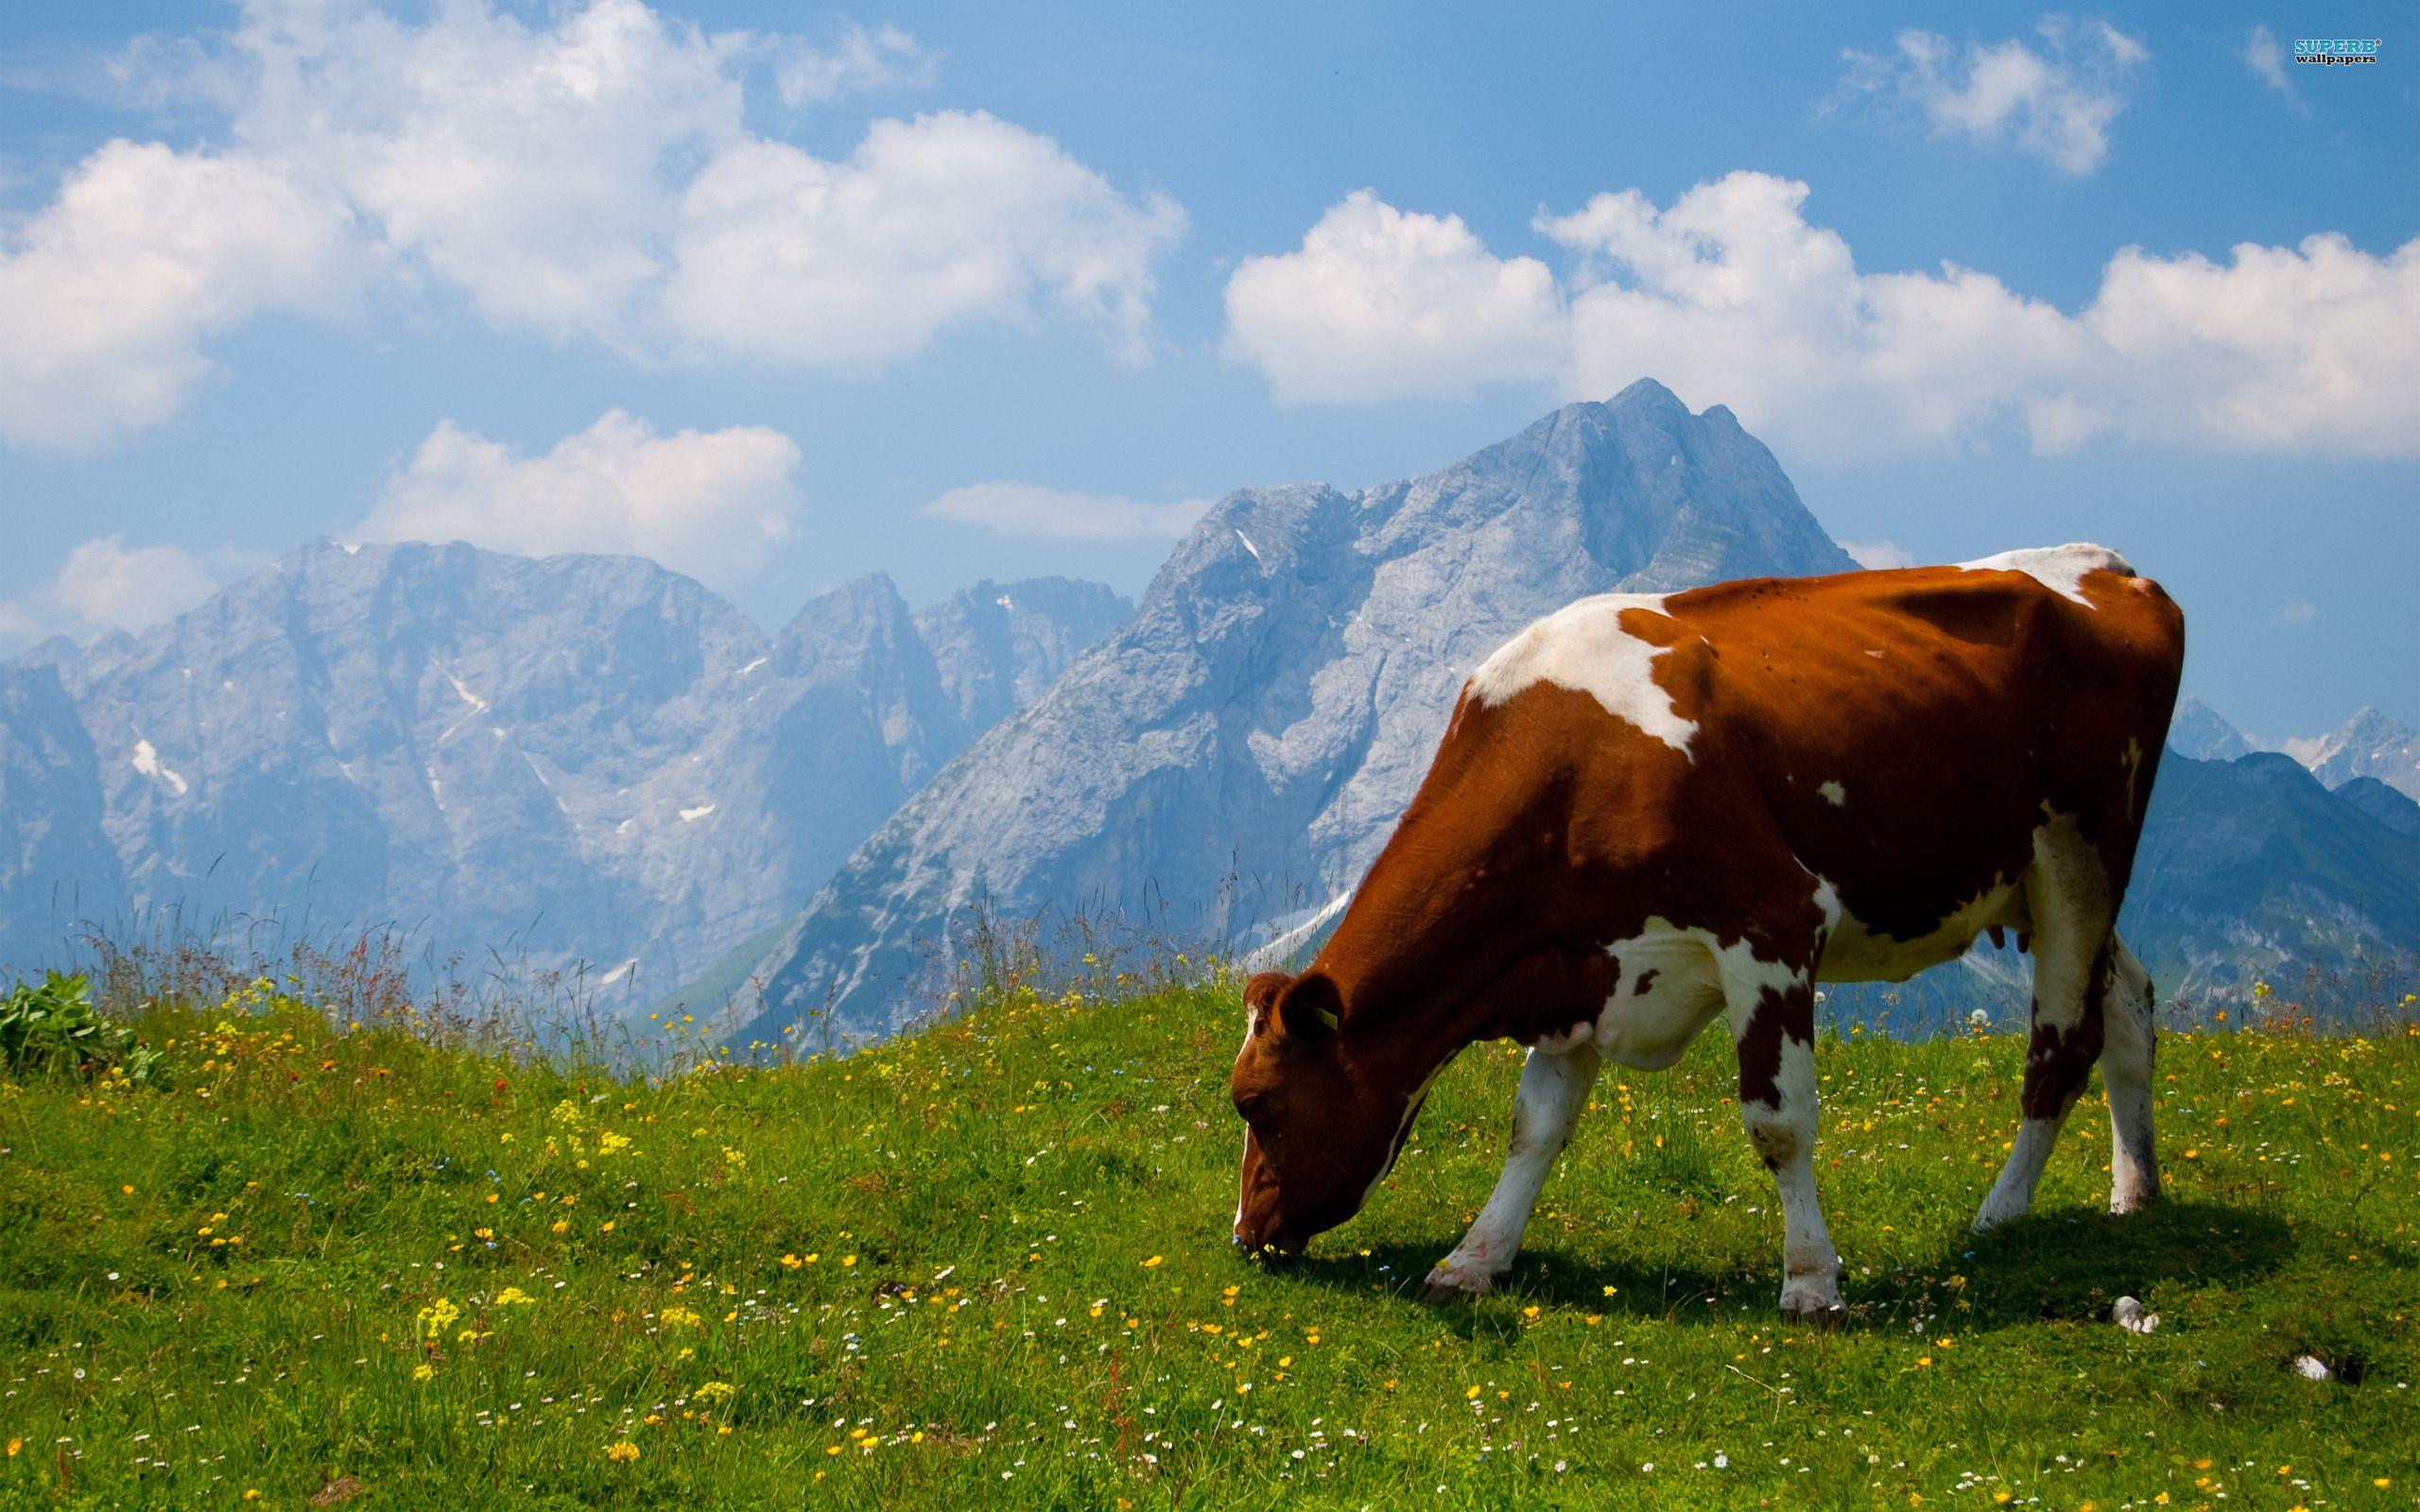 Cows Wallpaper. Download for Free